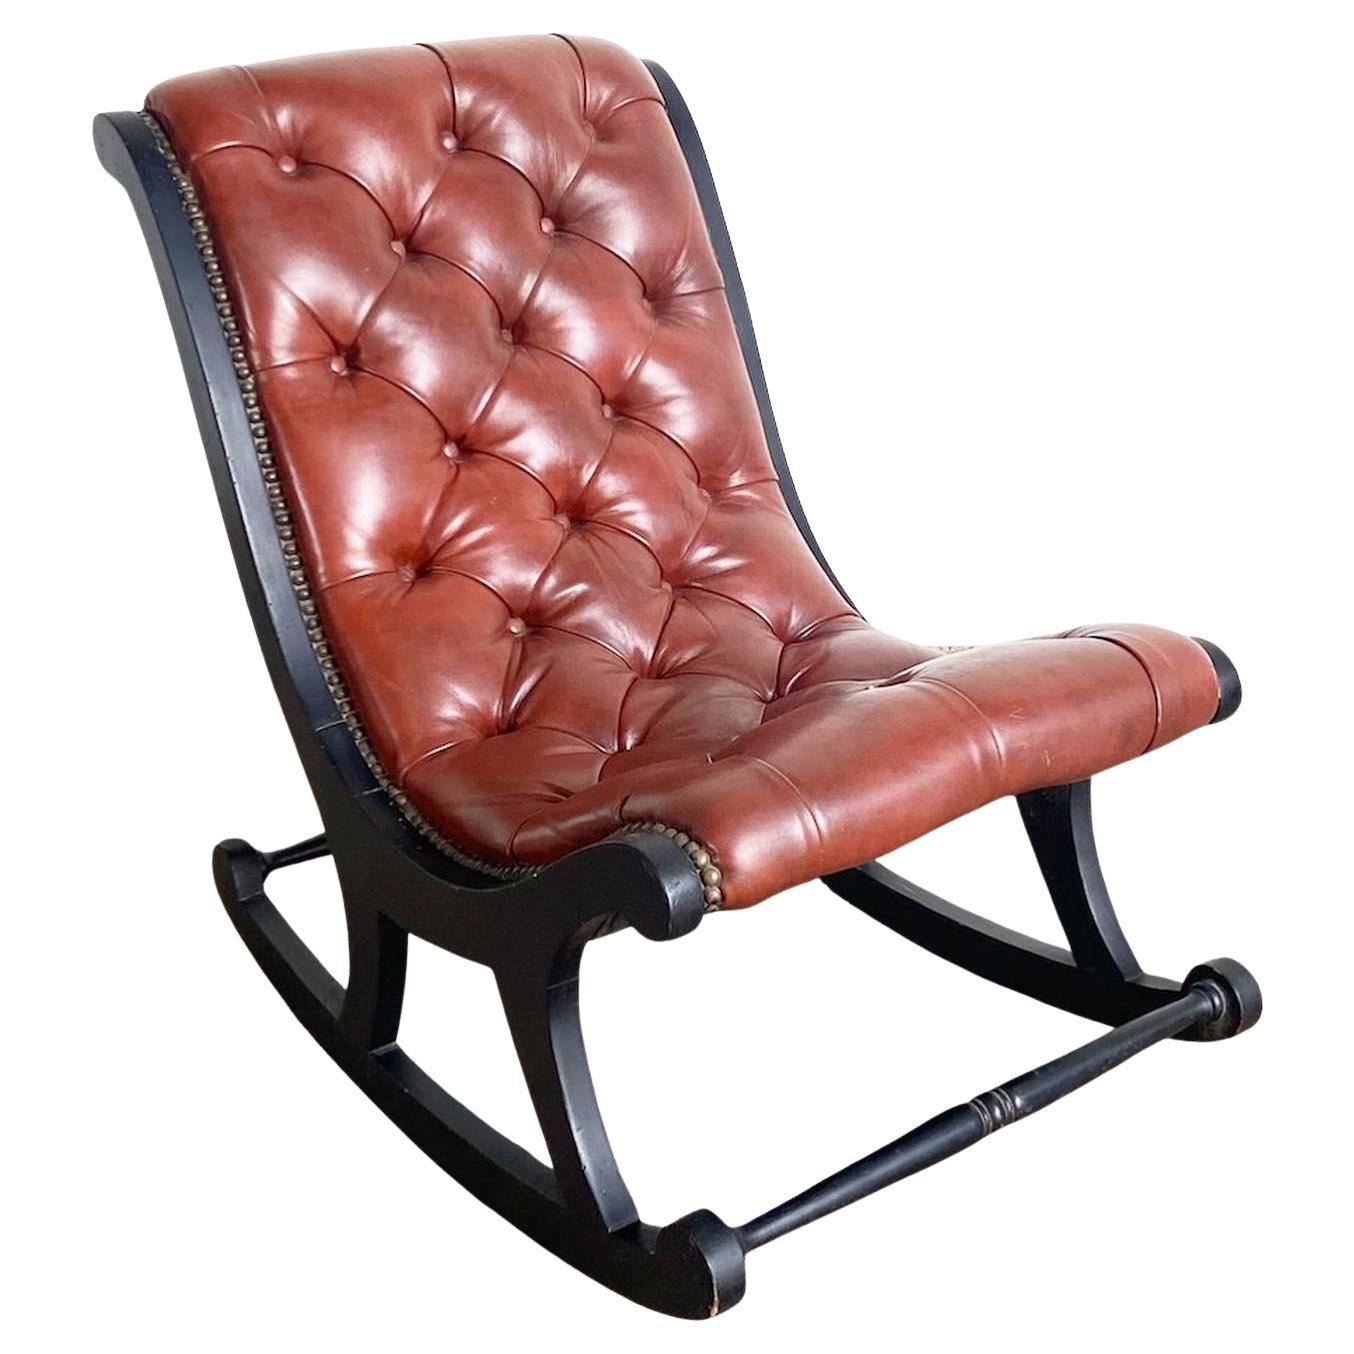 Regency Tufted Leather Rocking Chair For Sale